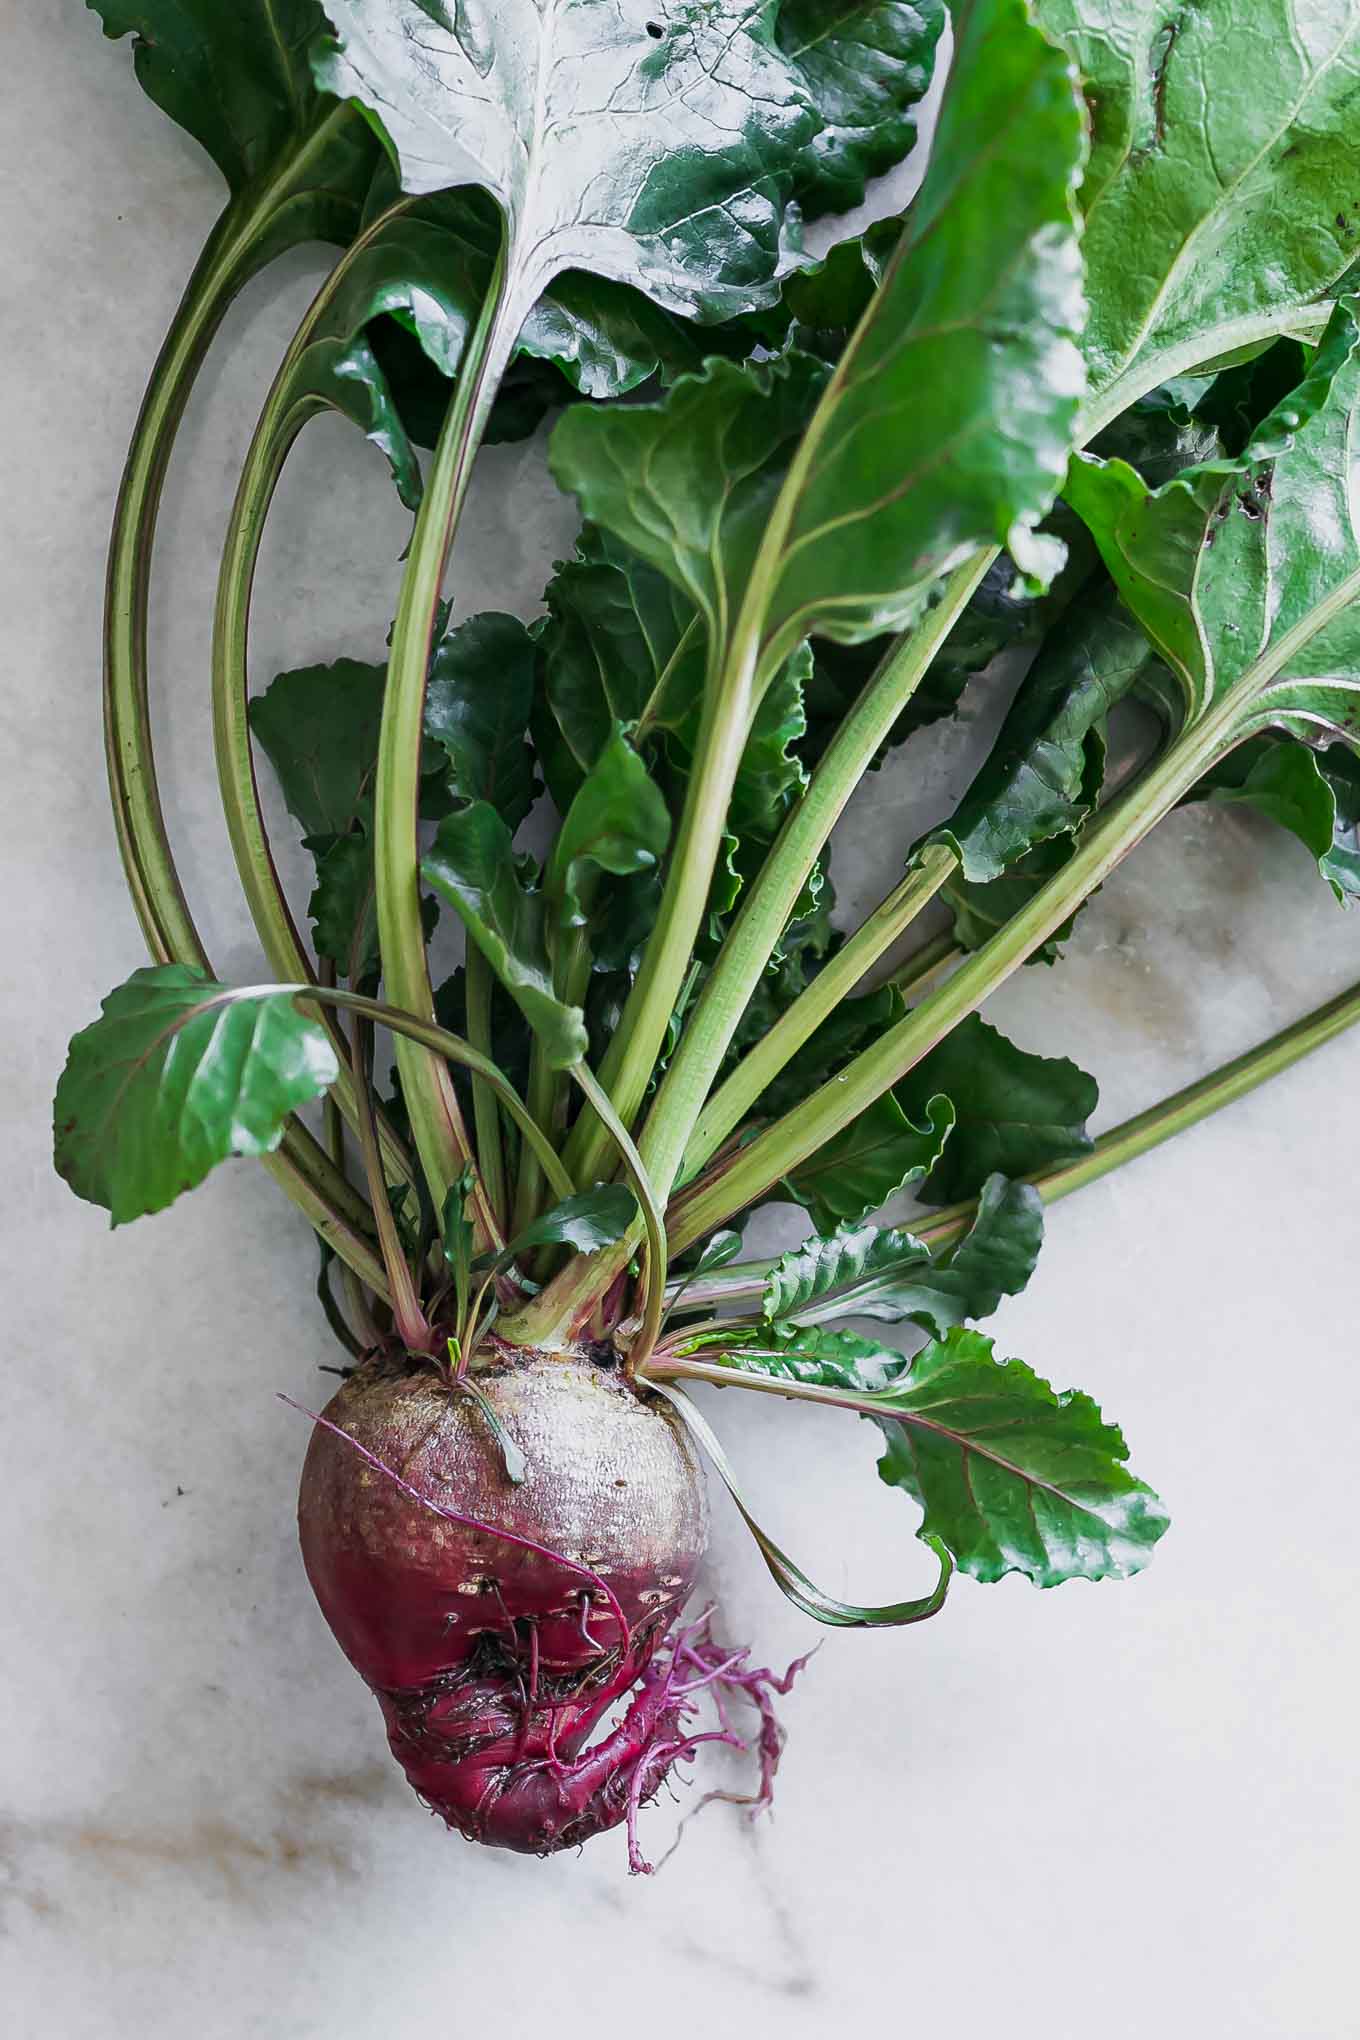 https://www.forkintheroad.co/wp-content/uploads/2022/02/beet-greens-smoothie-110.jpg